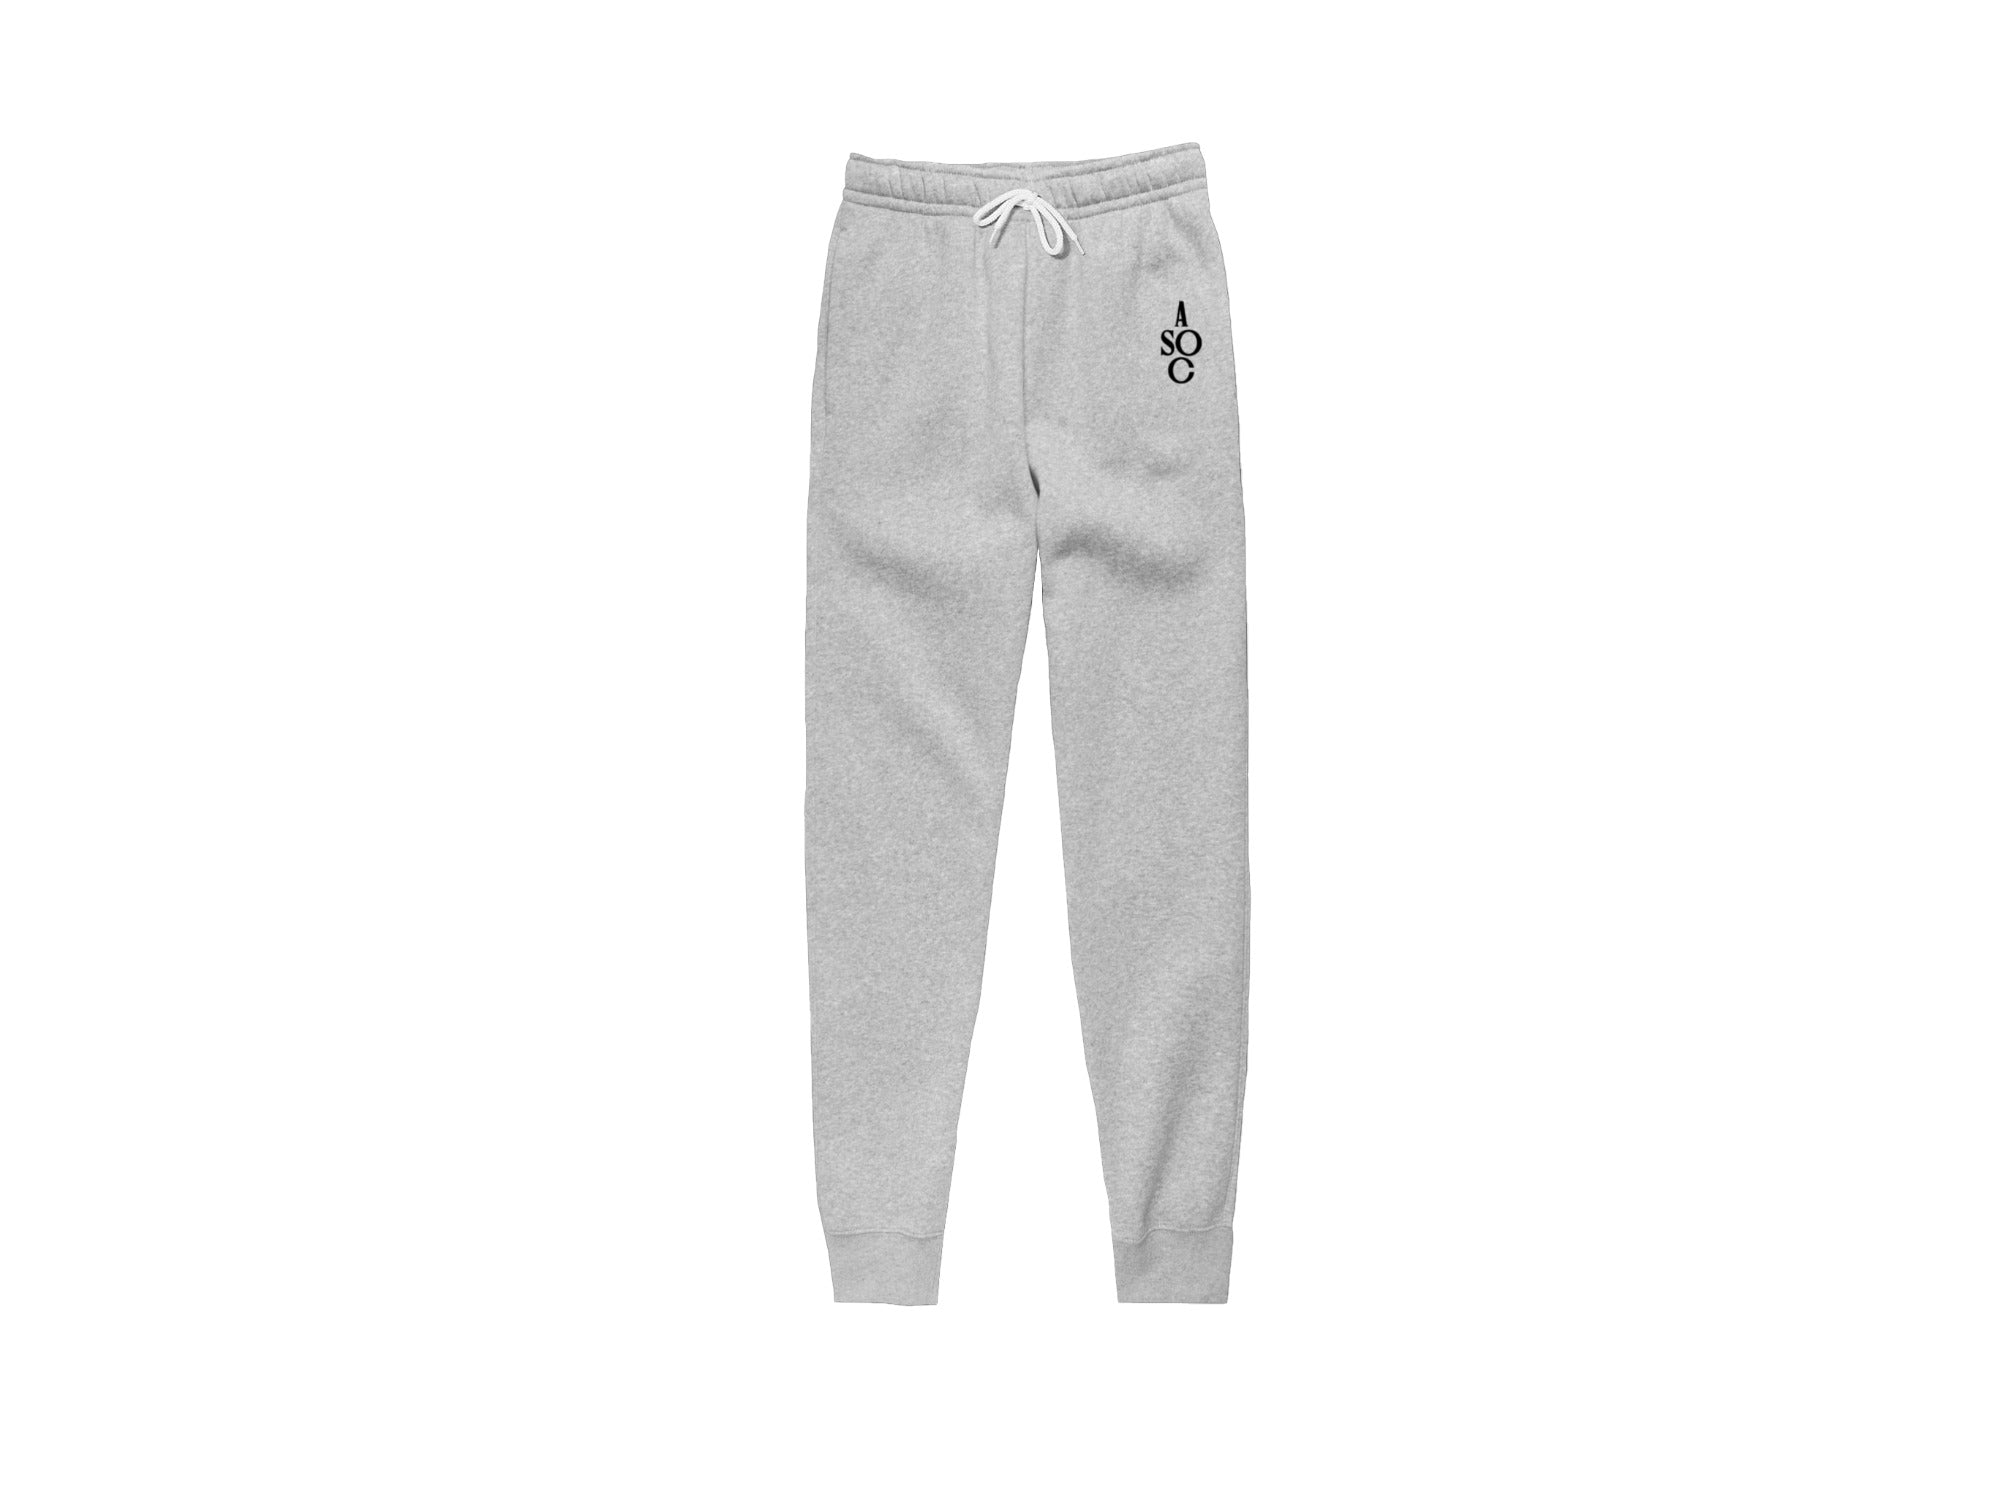 
  
  BLUE STATE OF CALM COZY JOGGER BOTTOMS Unisex
  
